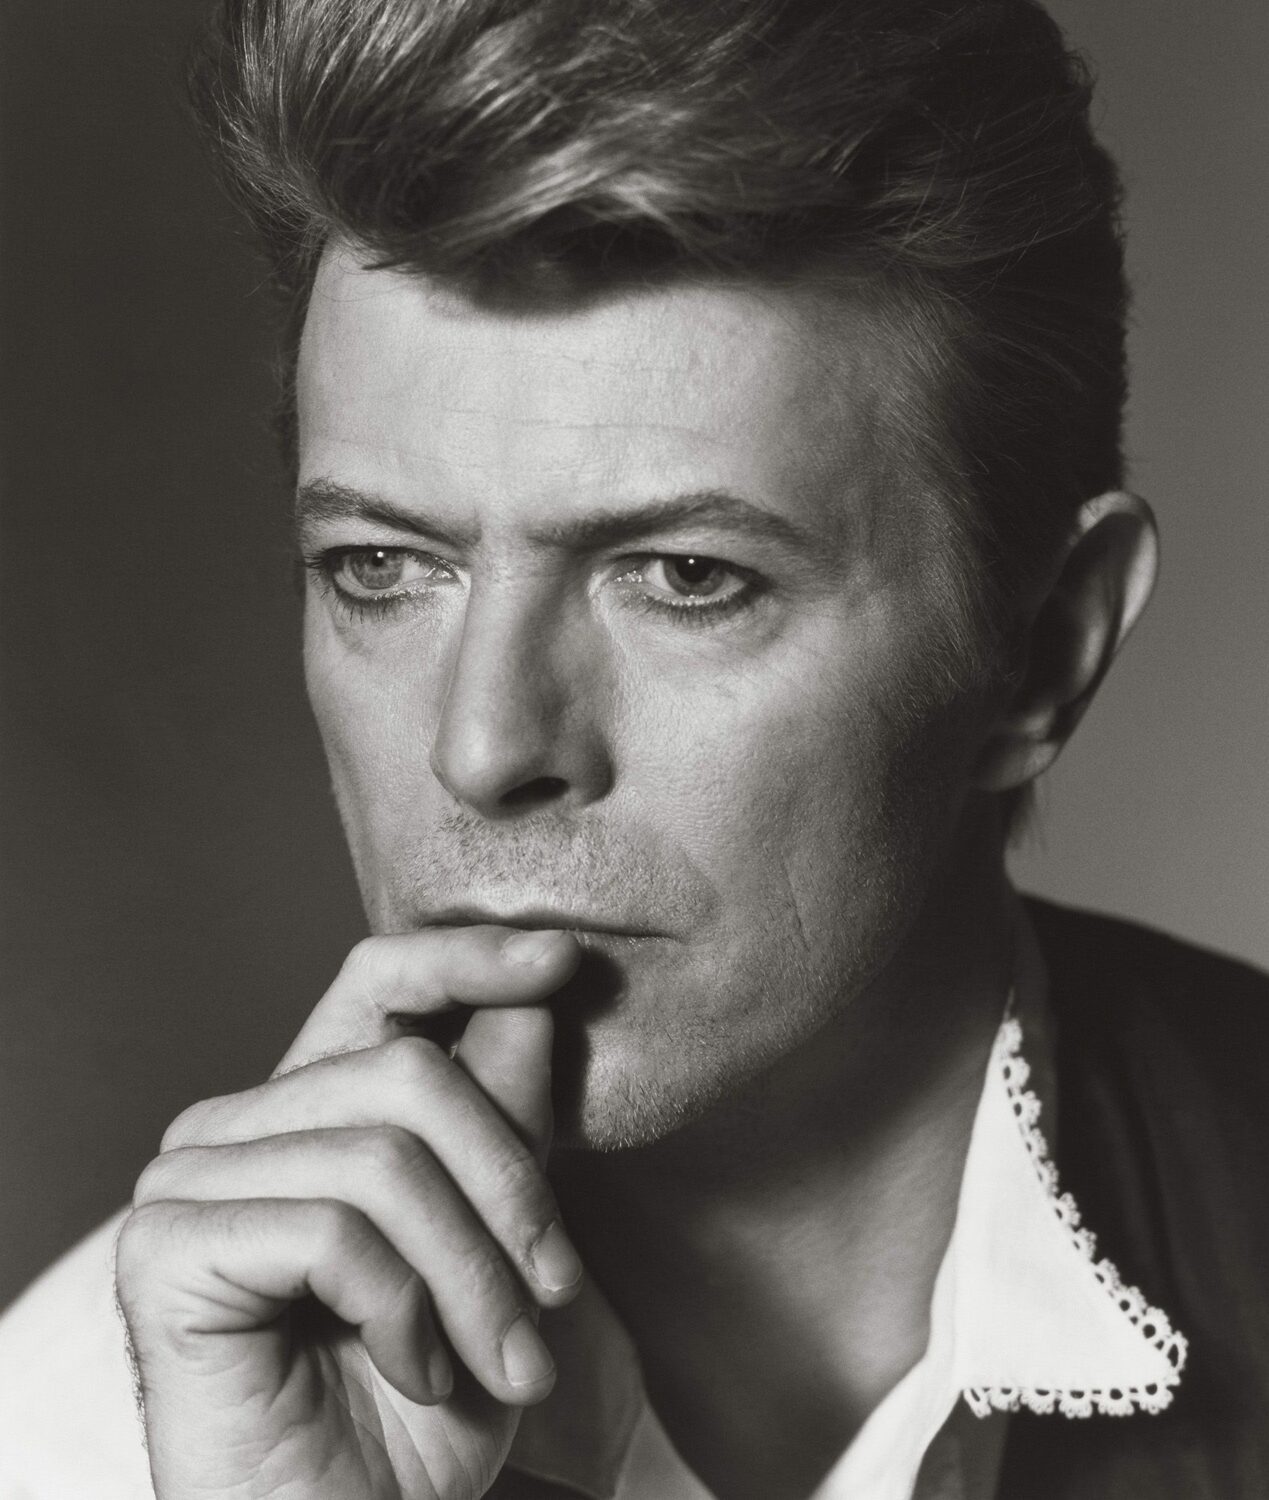 Herb Ritts: David Bowie